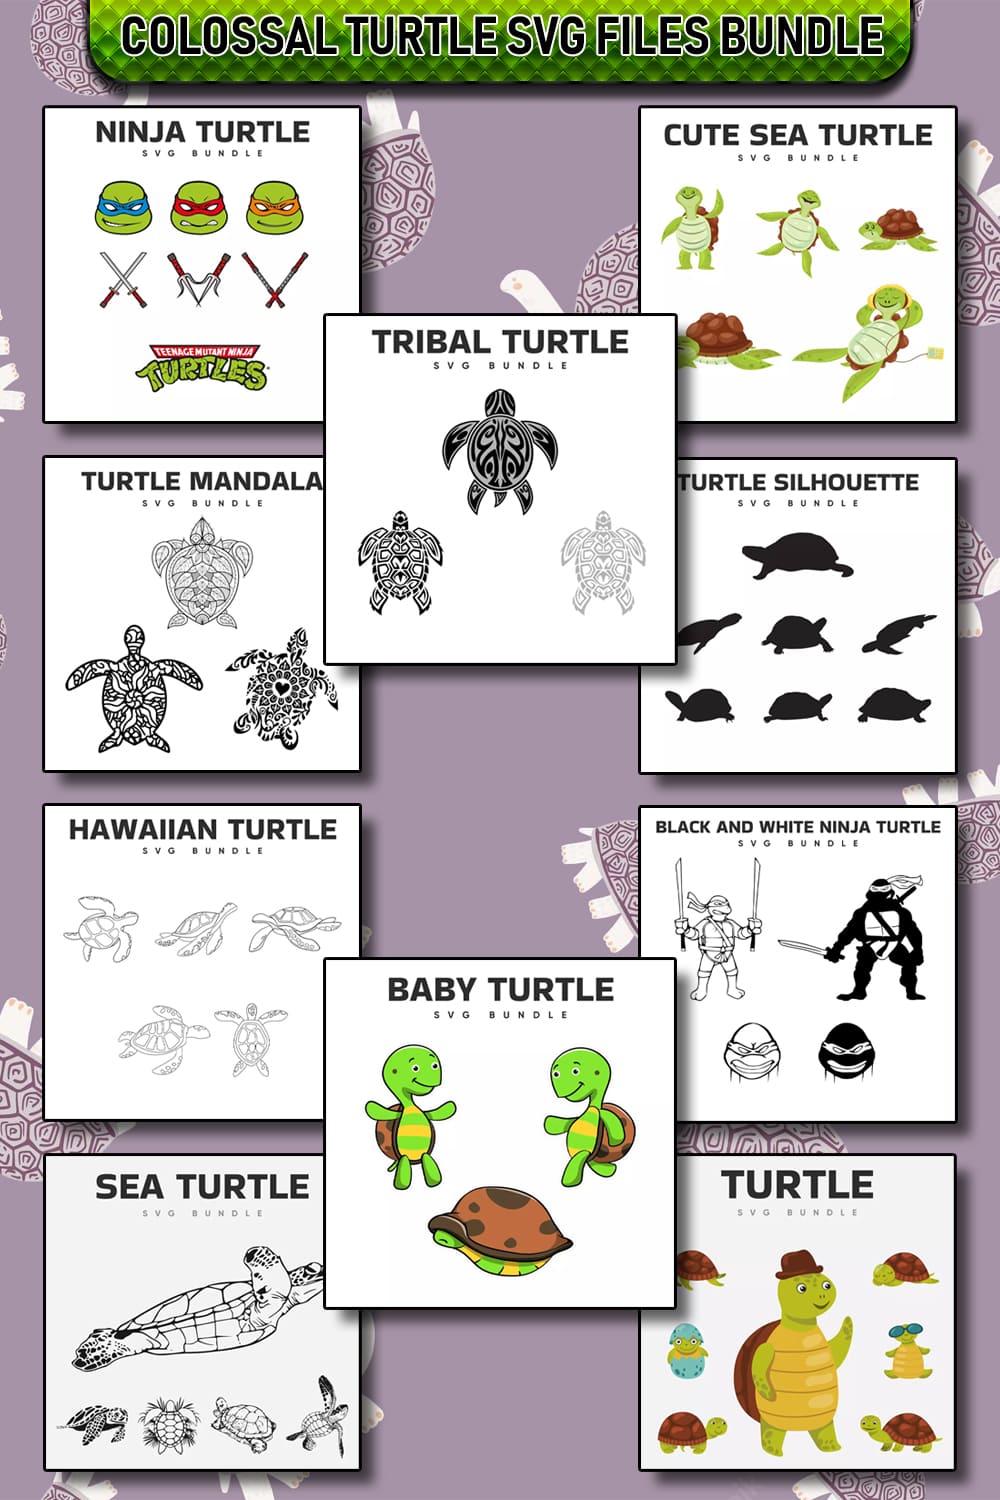 Bunch of turtles that are on a purple background.